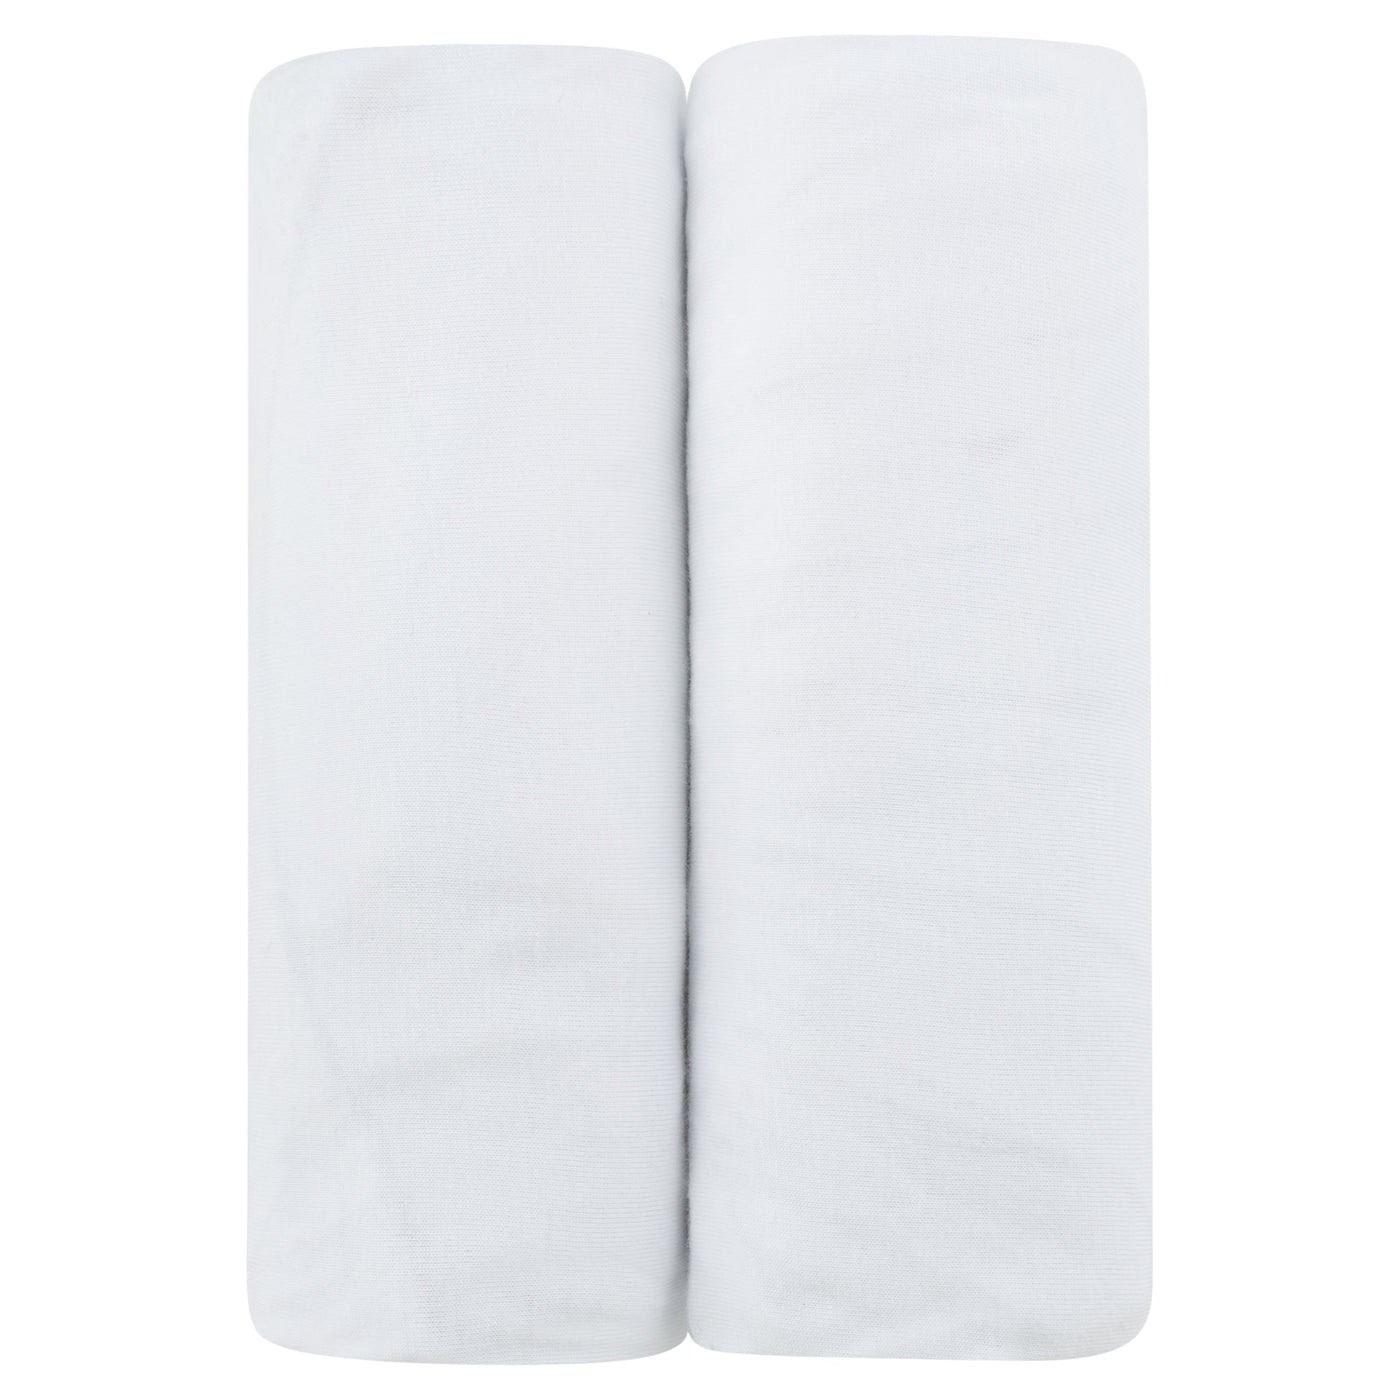 Ely's & Co. Two Pack Crib Sheets - White